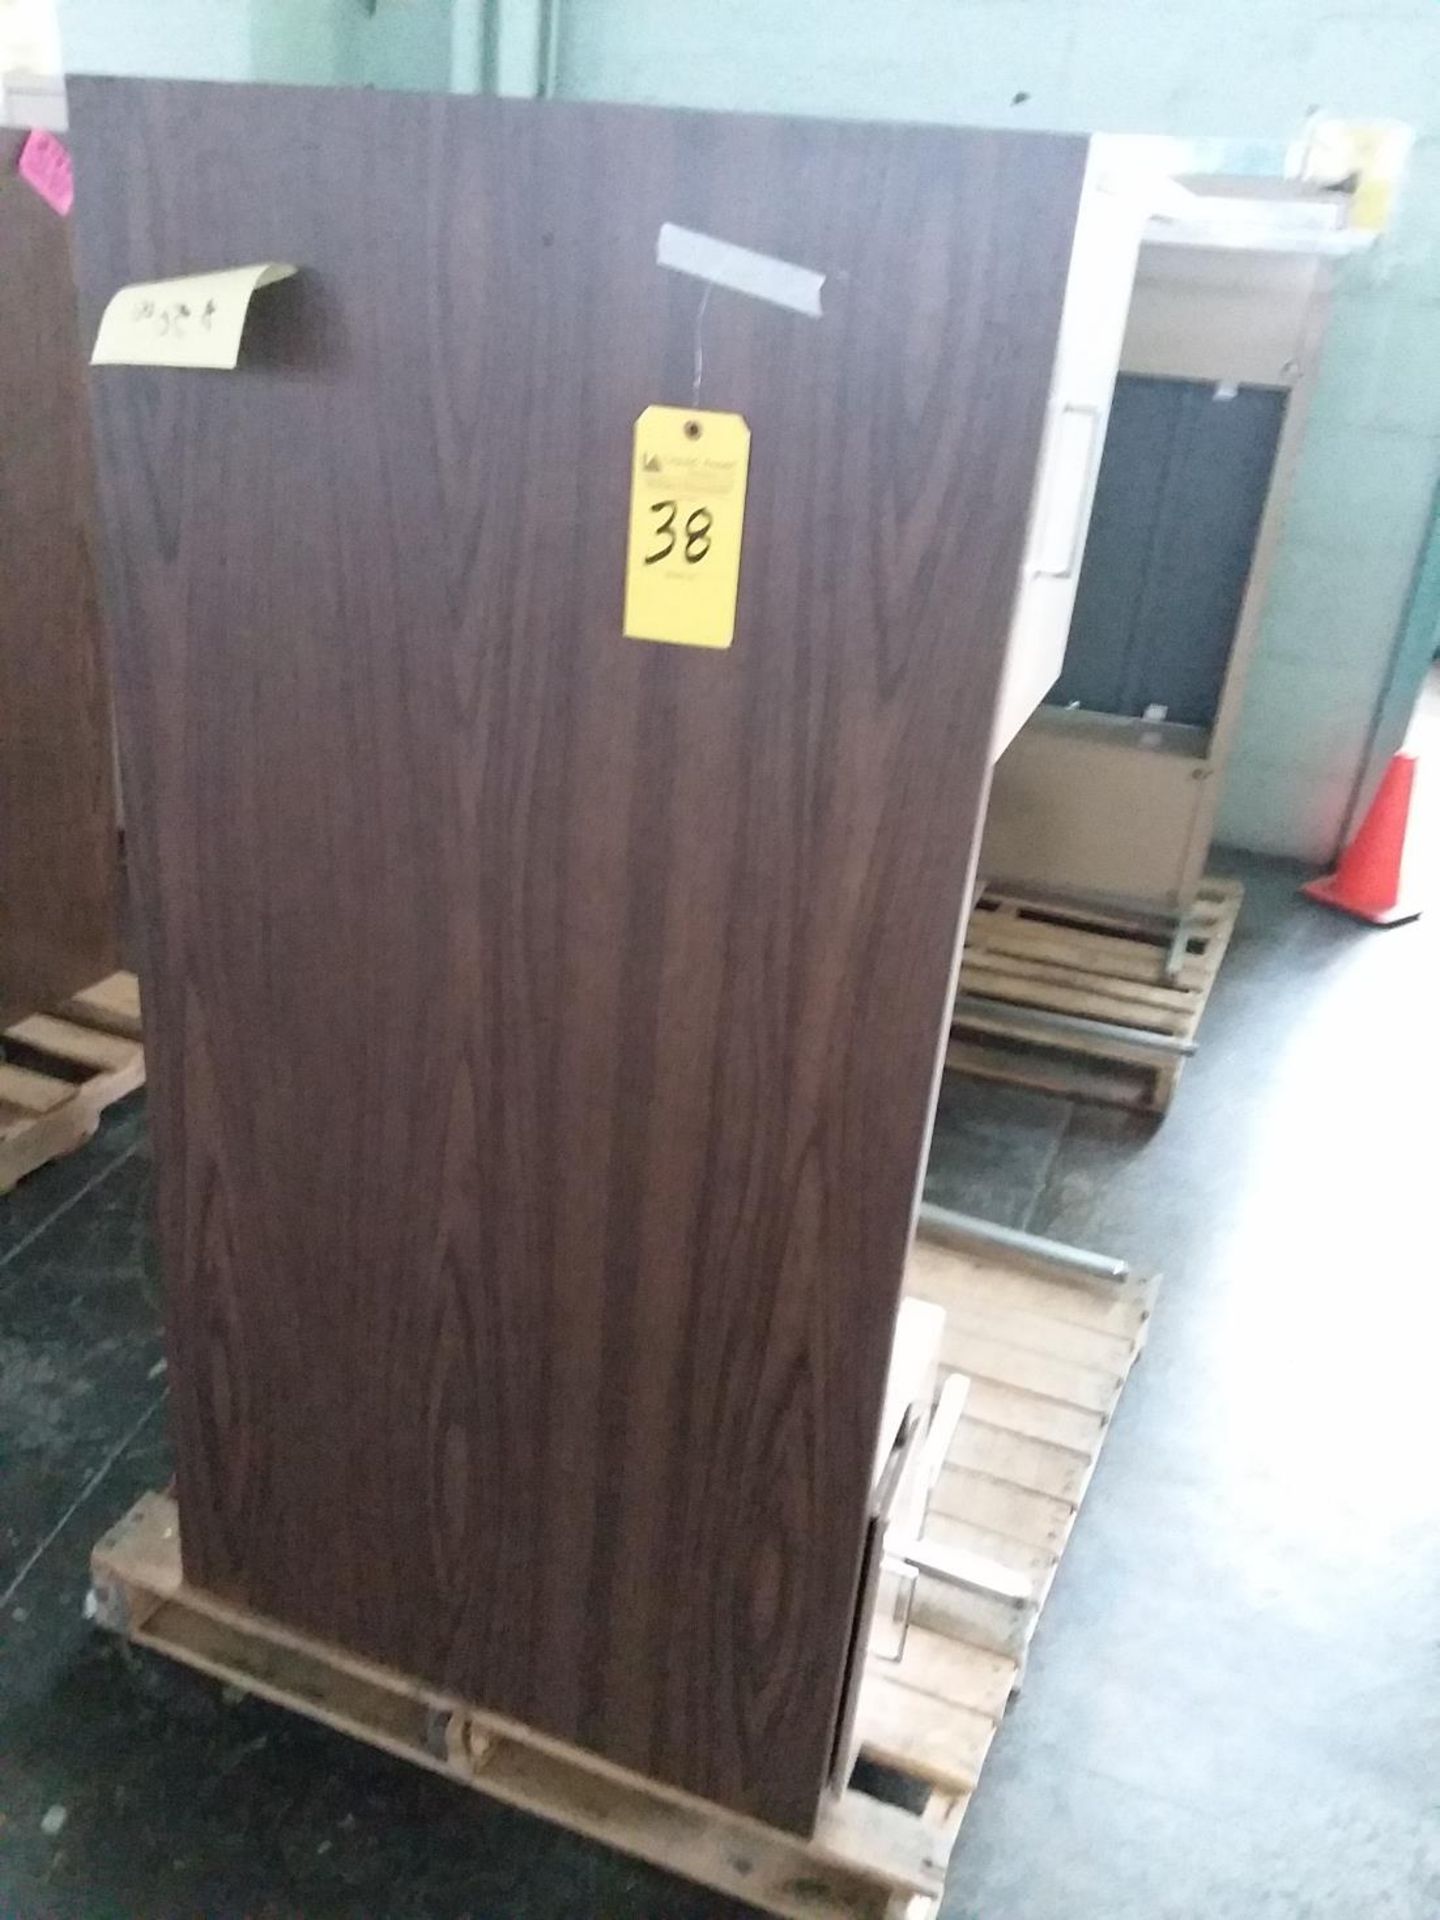 1 lot of office furniture which includes 30 4 drawer metal file cabinets, 18 meta desks, 2 2drawer